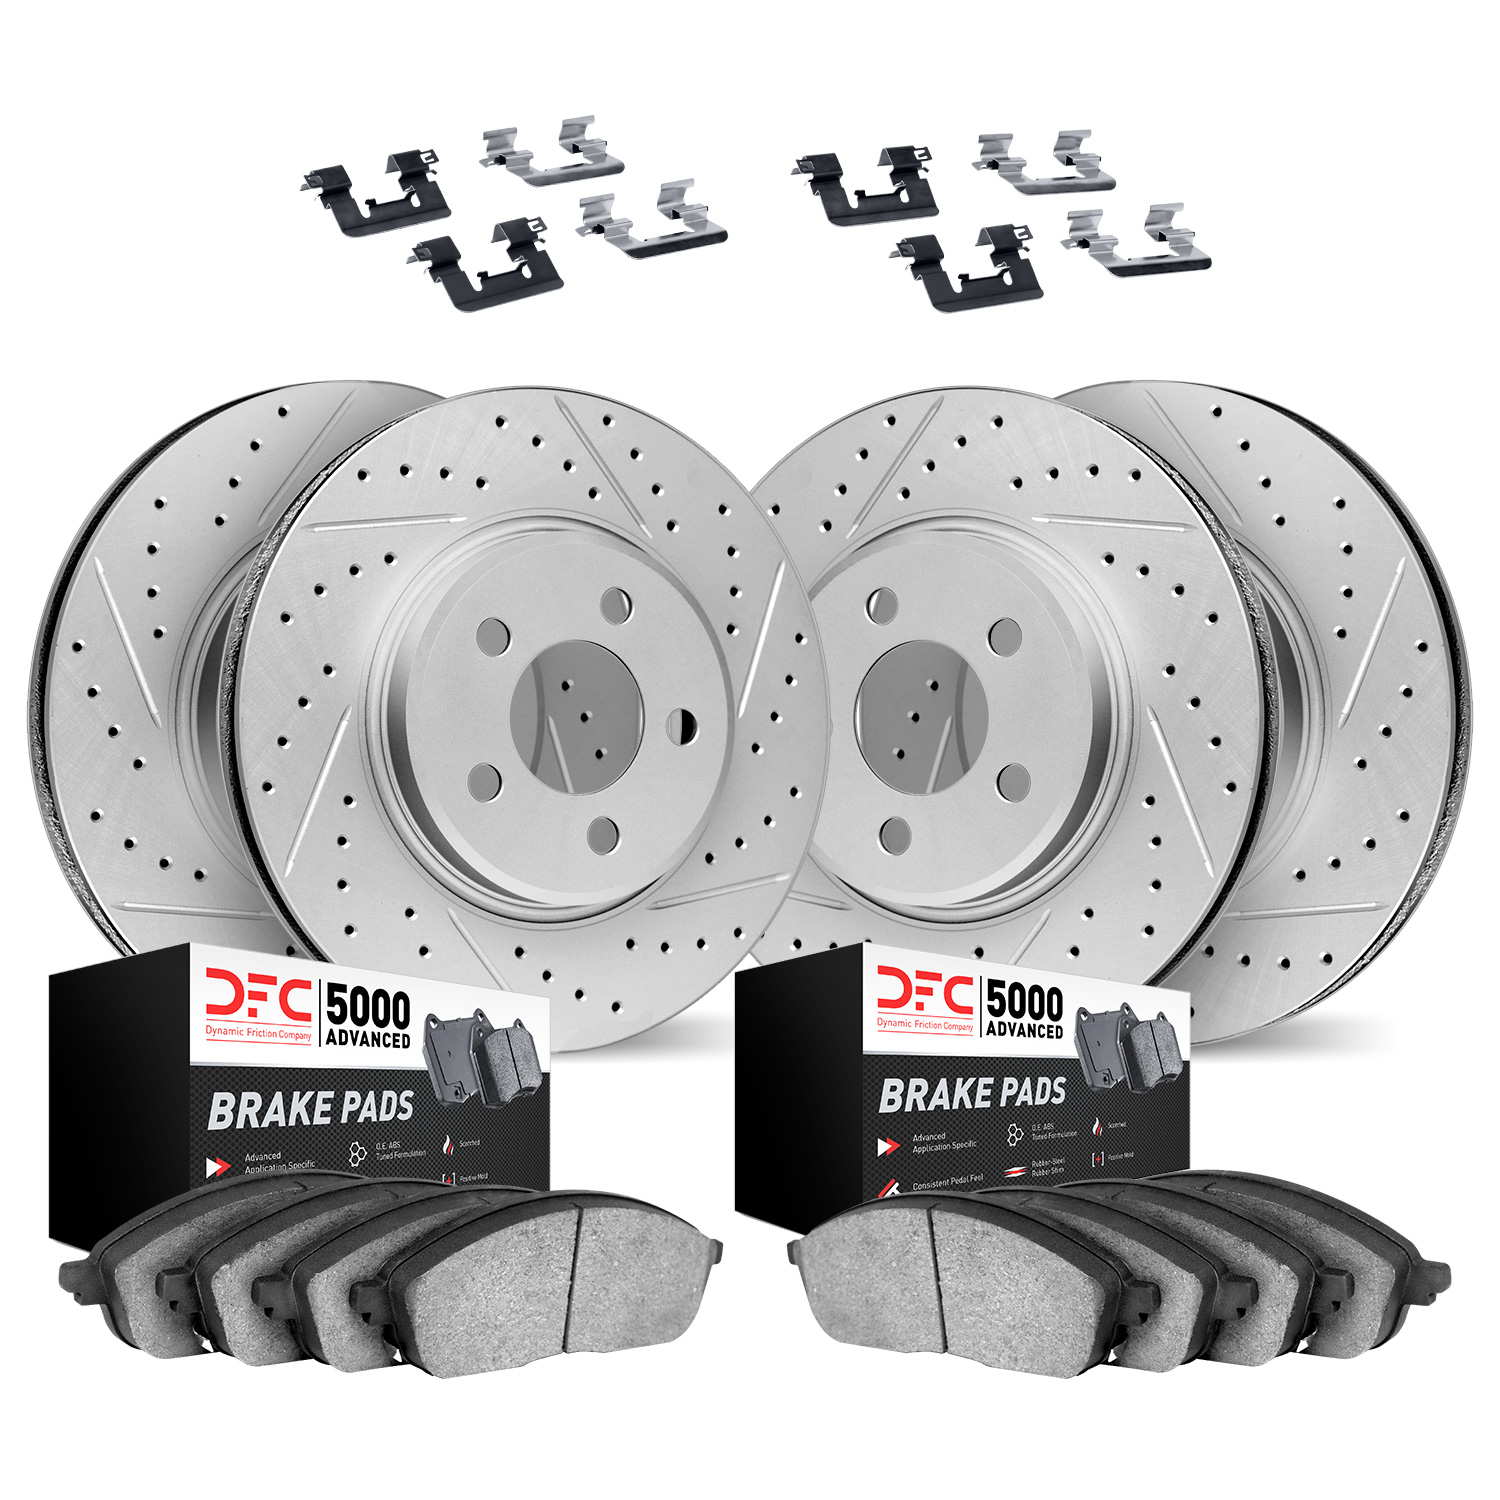 2514-31028 Geoperformance Drilled/Slotted Rotors w/5000 Advanced Brake Pads Kit & Hardware, 2012-2019 BMW, Position: Front and R